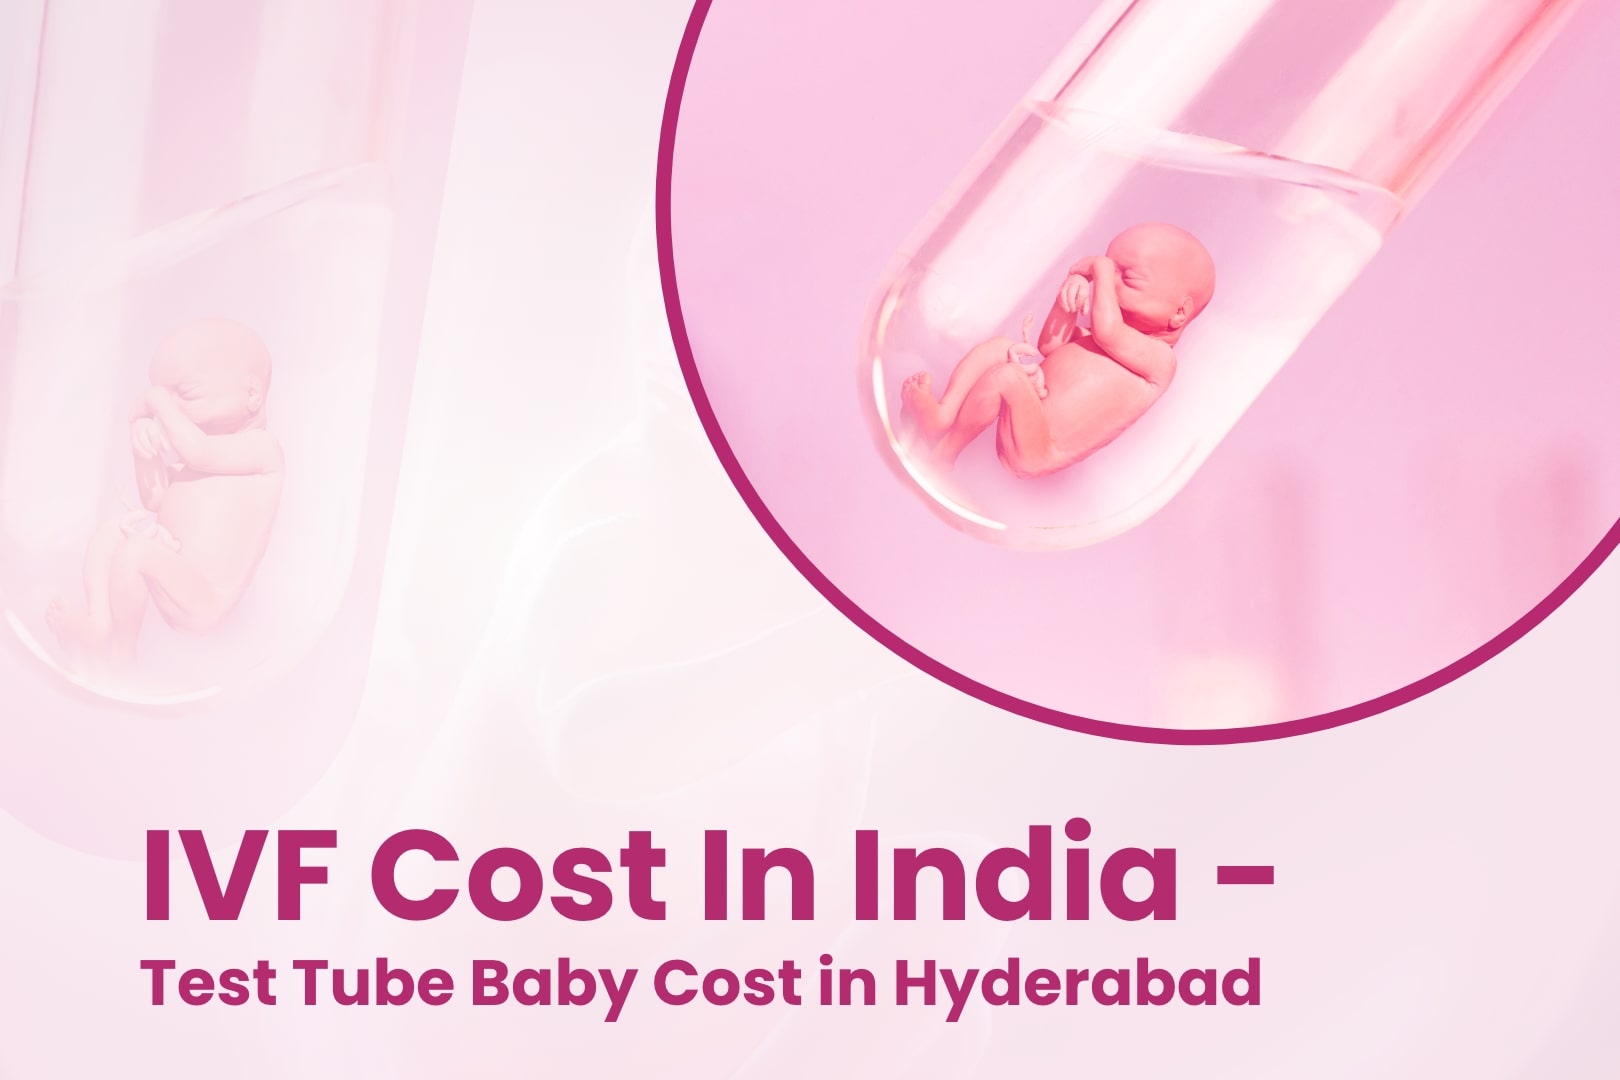 IVF Cost In India - Test Tube Baby Cost in Hyderabad